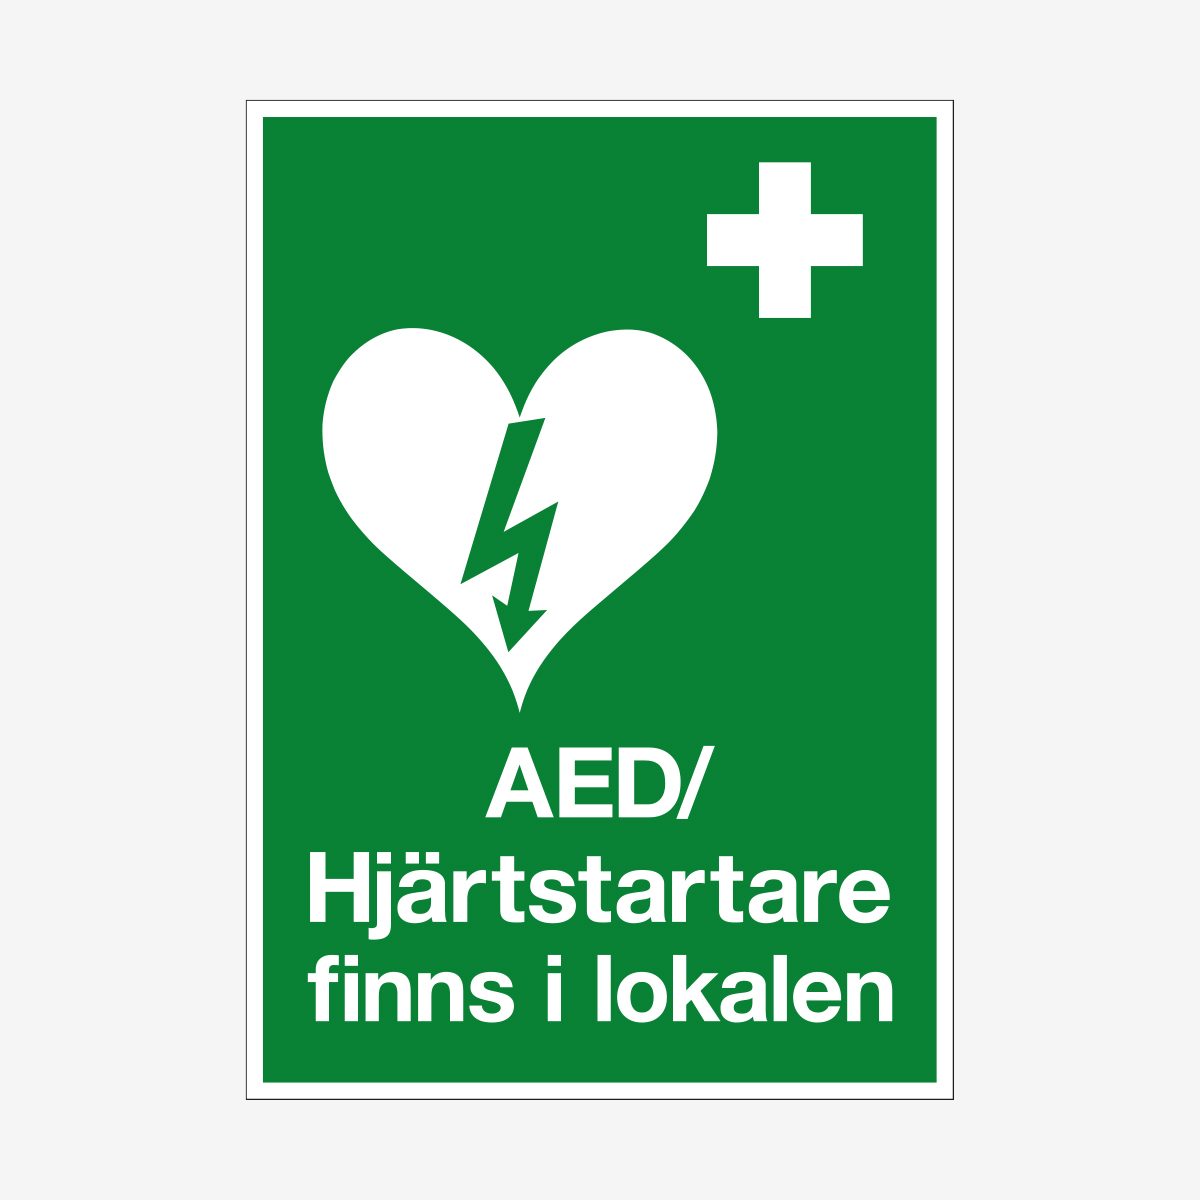 aed-hj-rtstartare-finns-i-lokalen-concil-house-of-safety